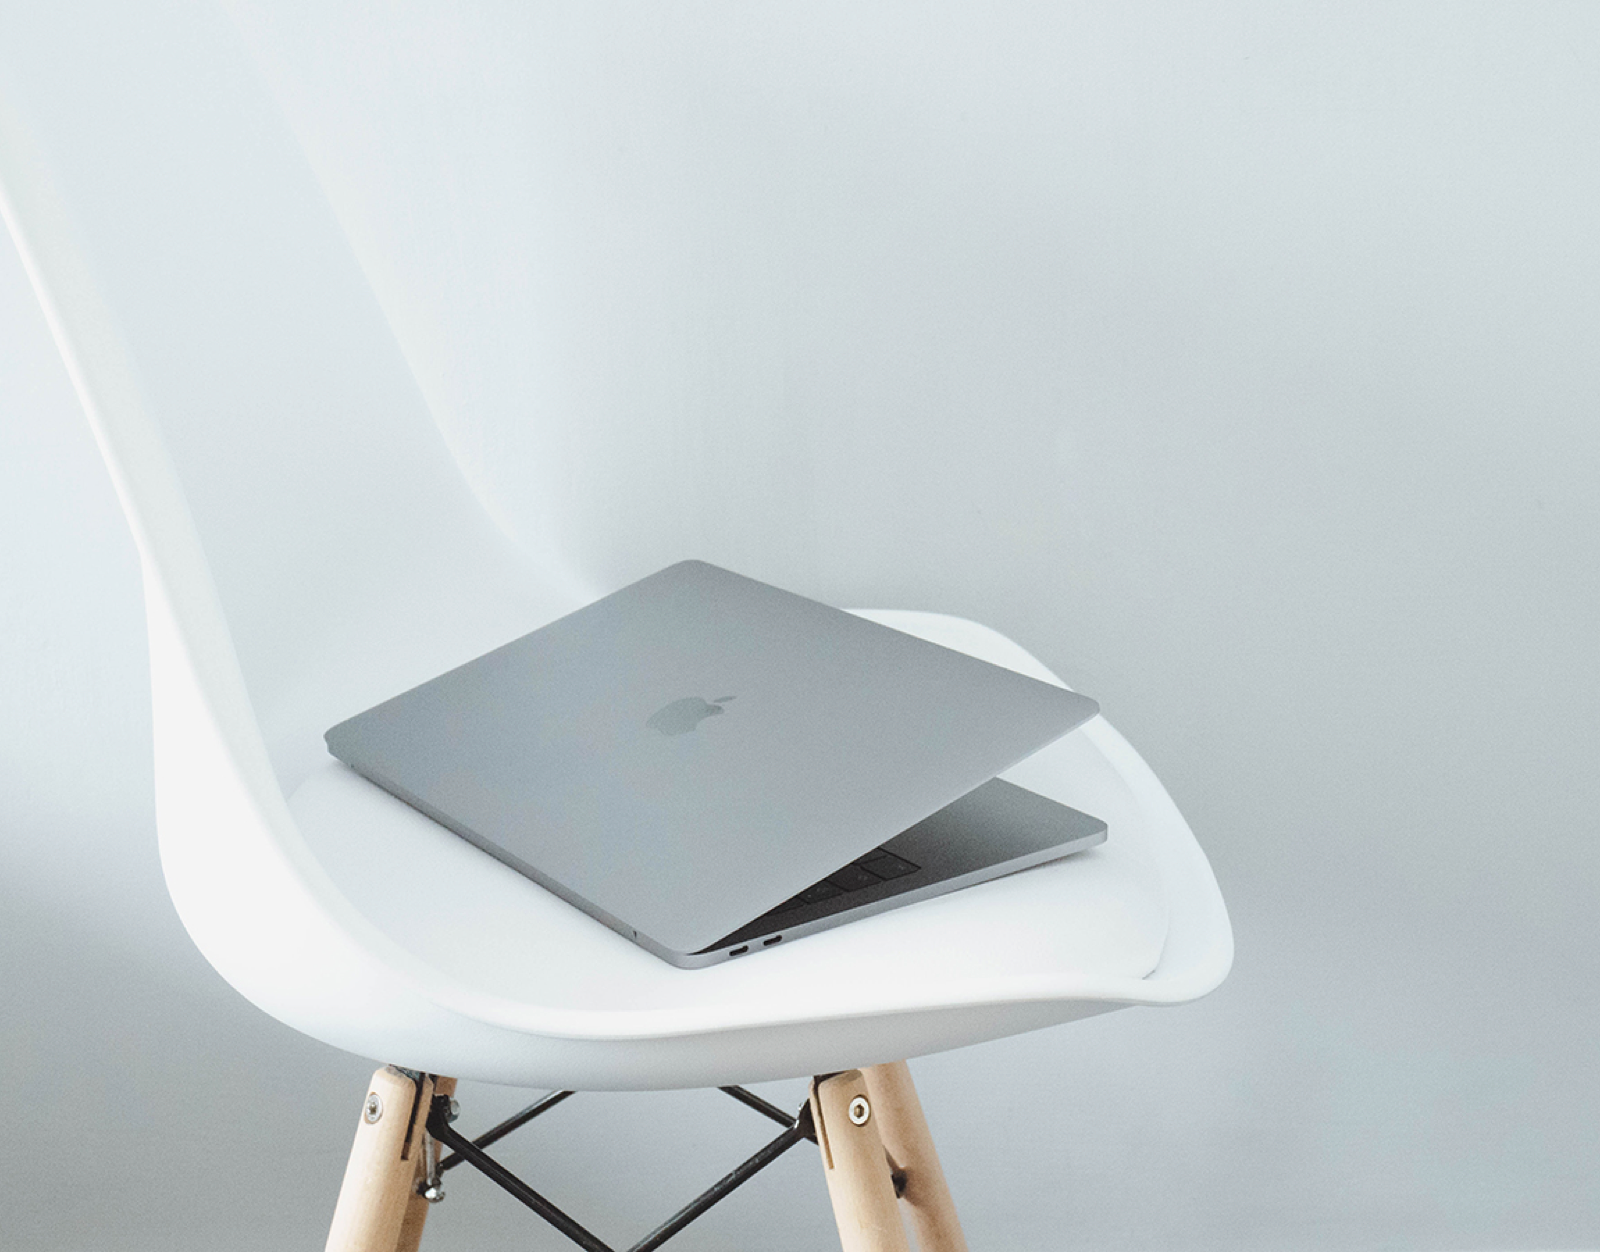 Laptop in a white chair